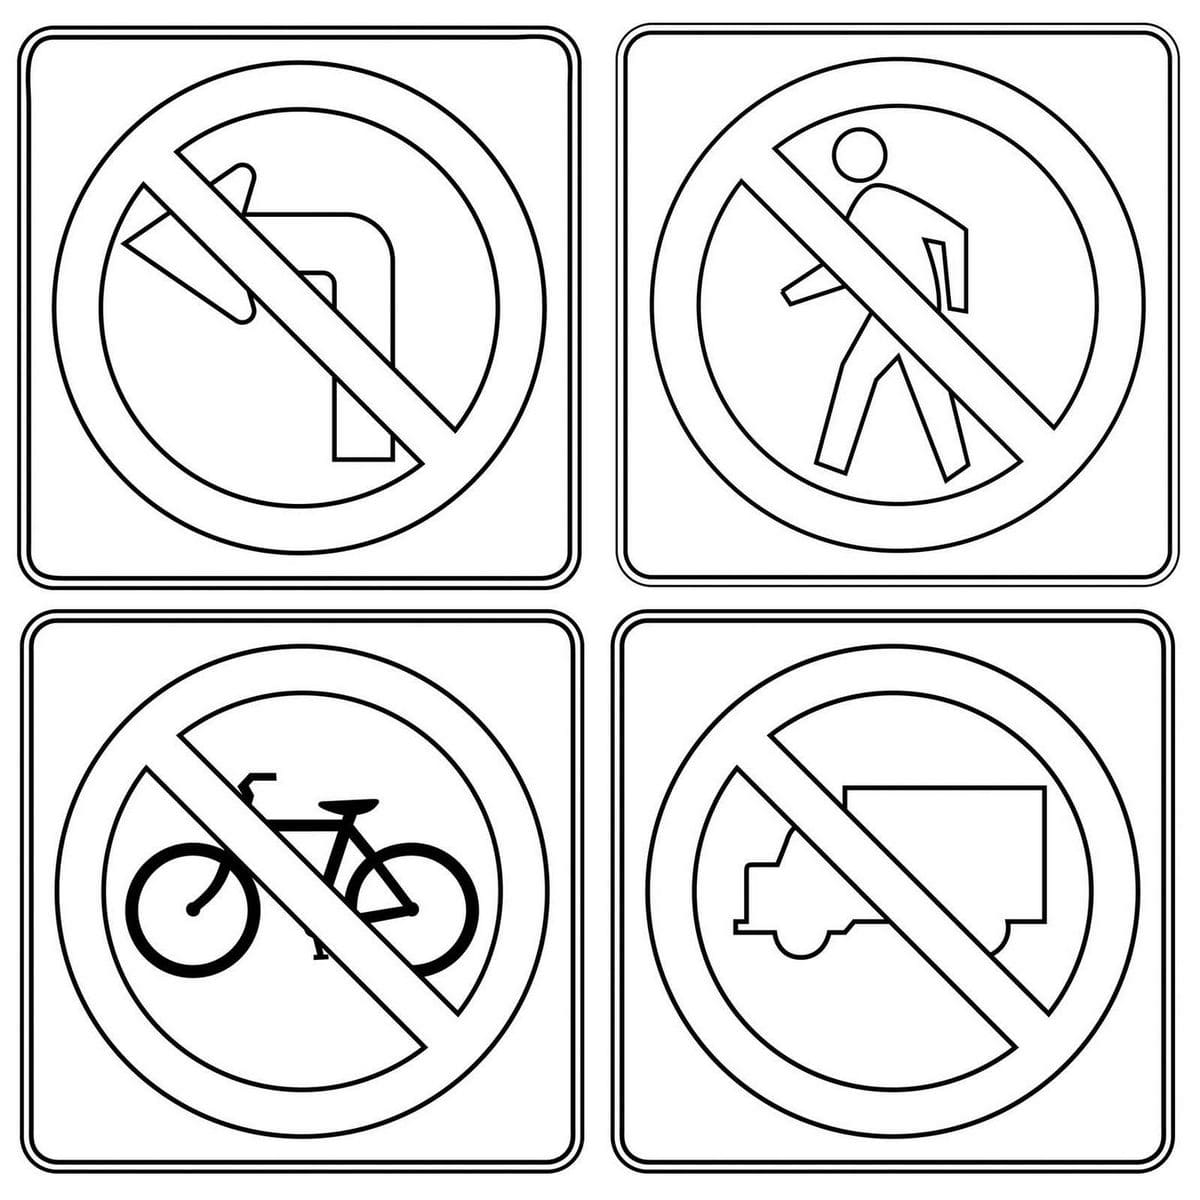 Traffic Sign Coloring Pages | Coloring Pages for Kids